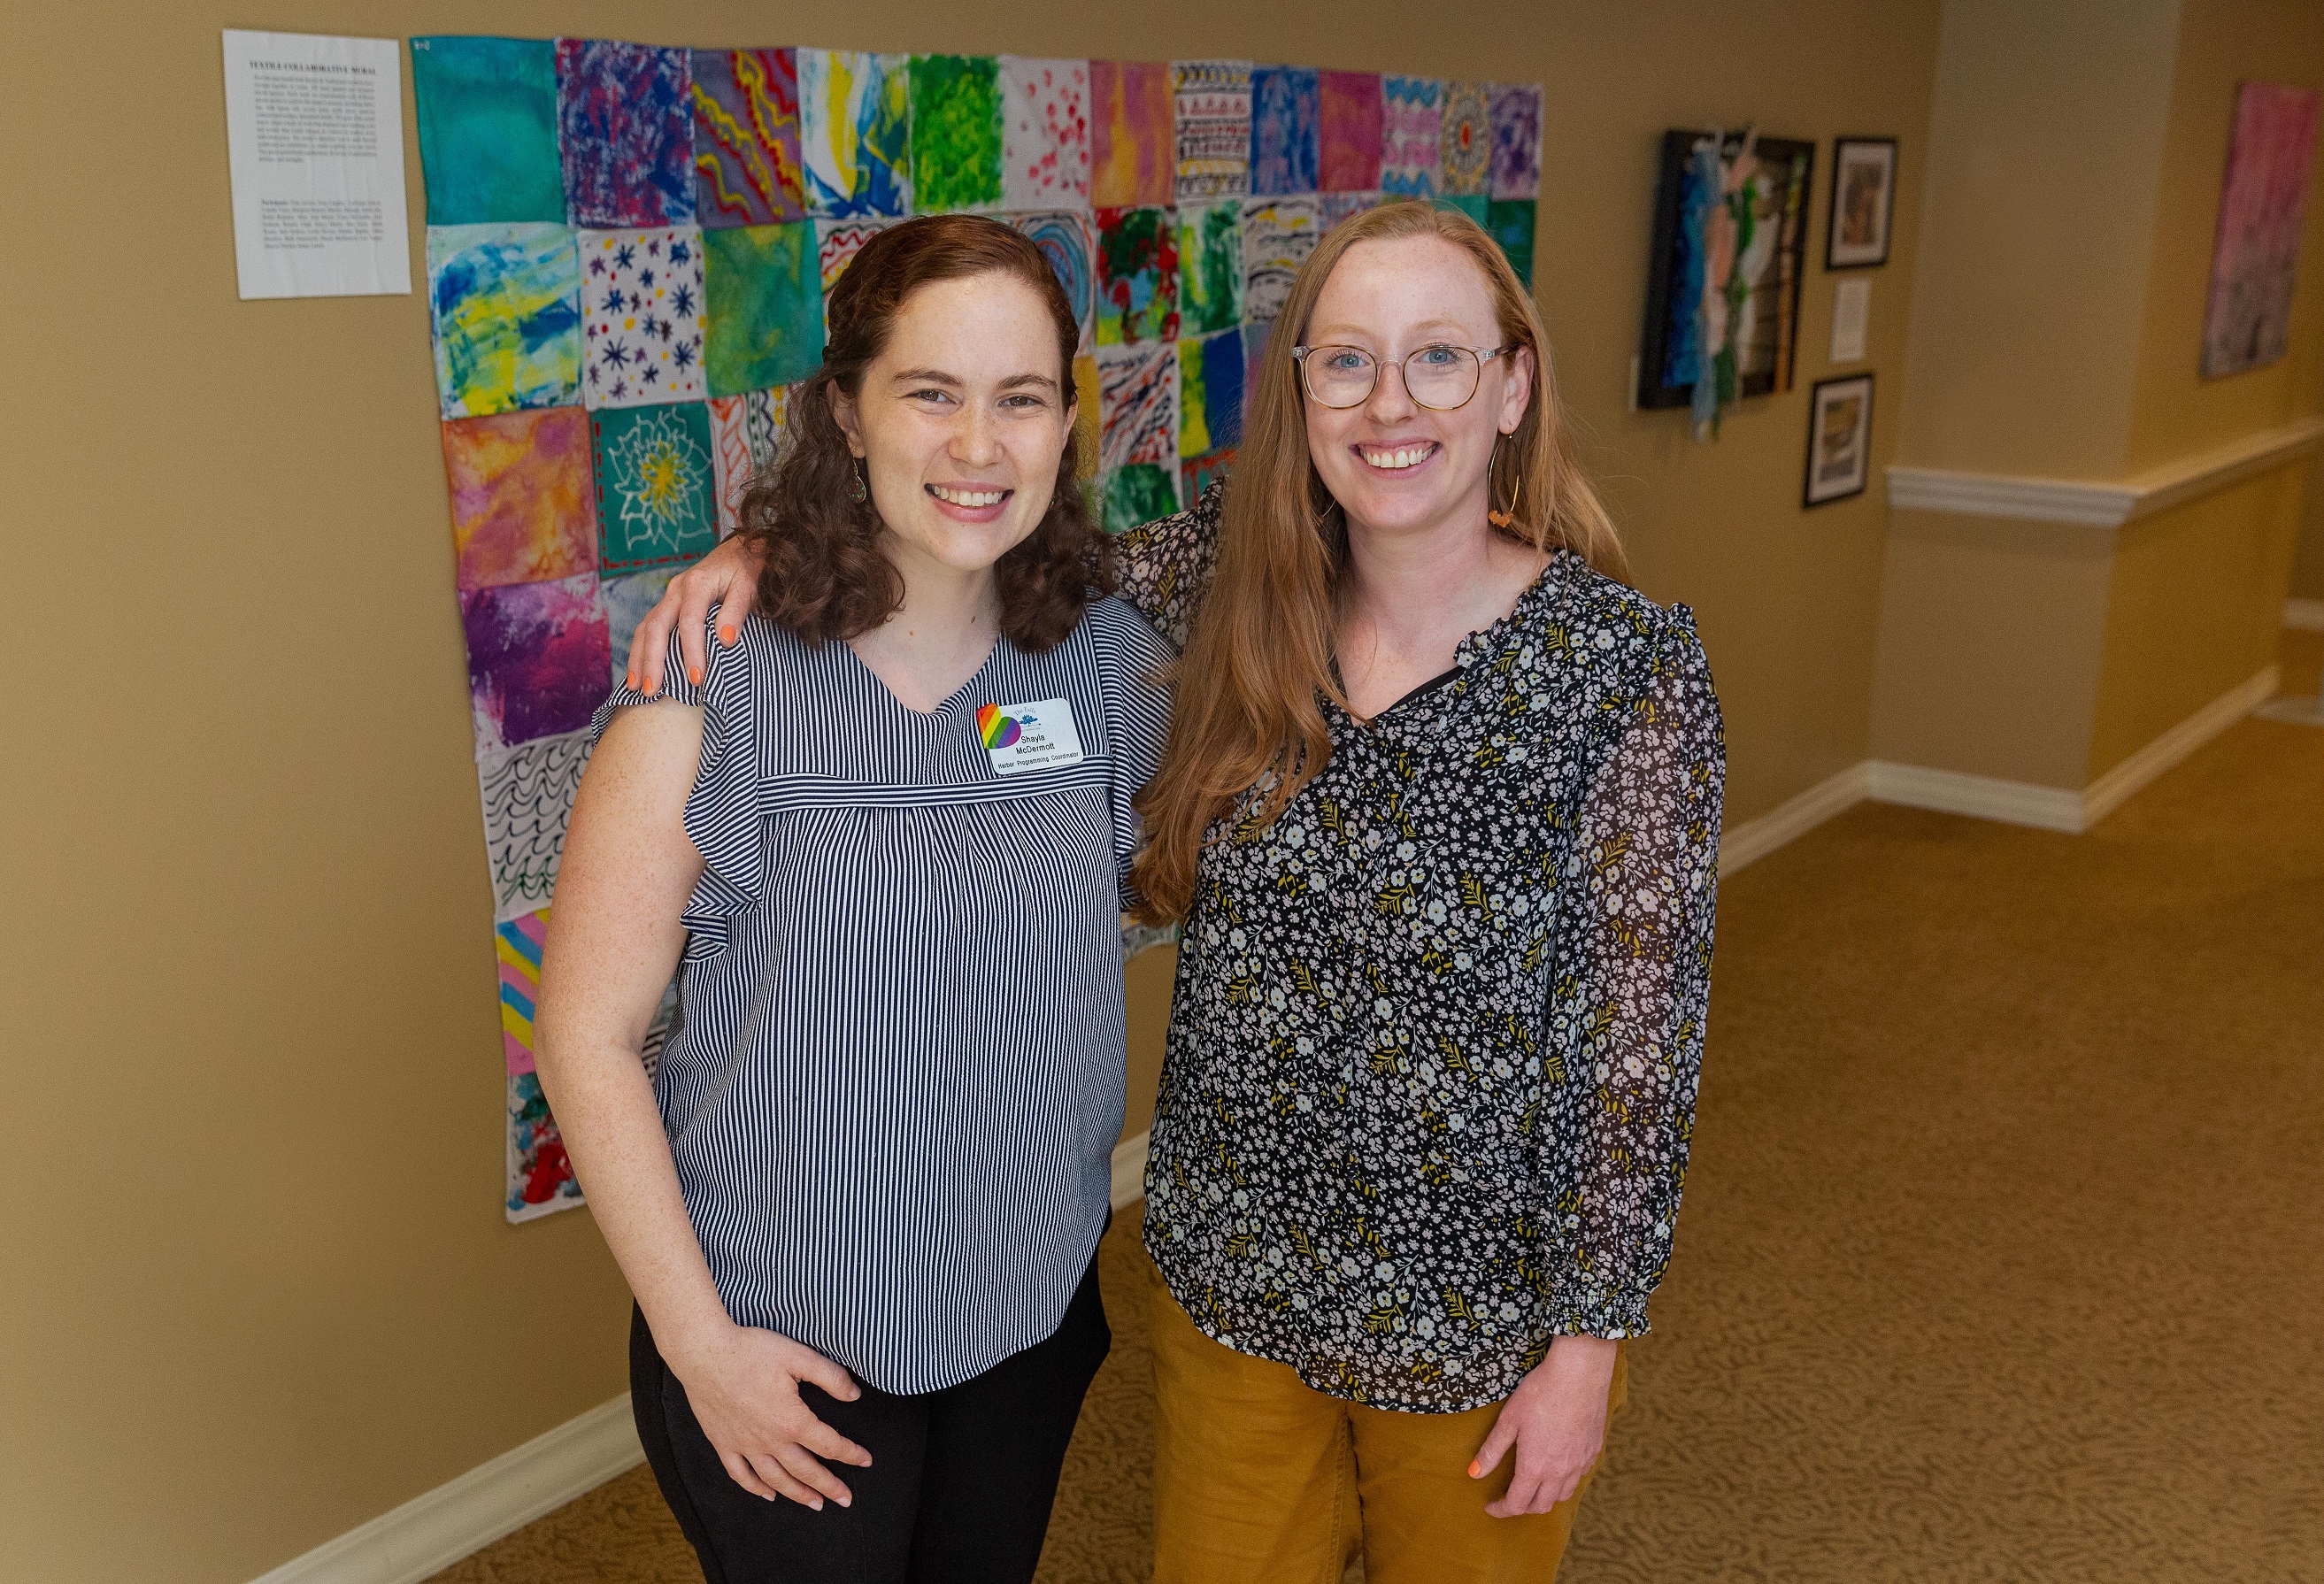 The Falls at Cordingly Dam’s Shayla McDermott, music therapist and Kayla Larsen, art therapist (pictured from left to right) direct The Falls’ popular expressive arts therapy program.